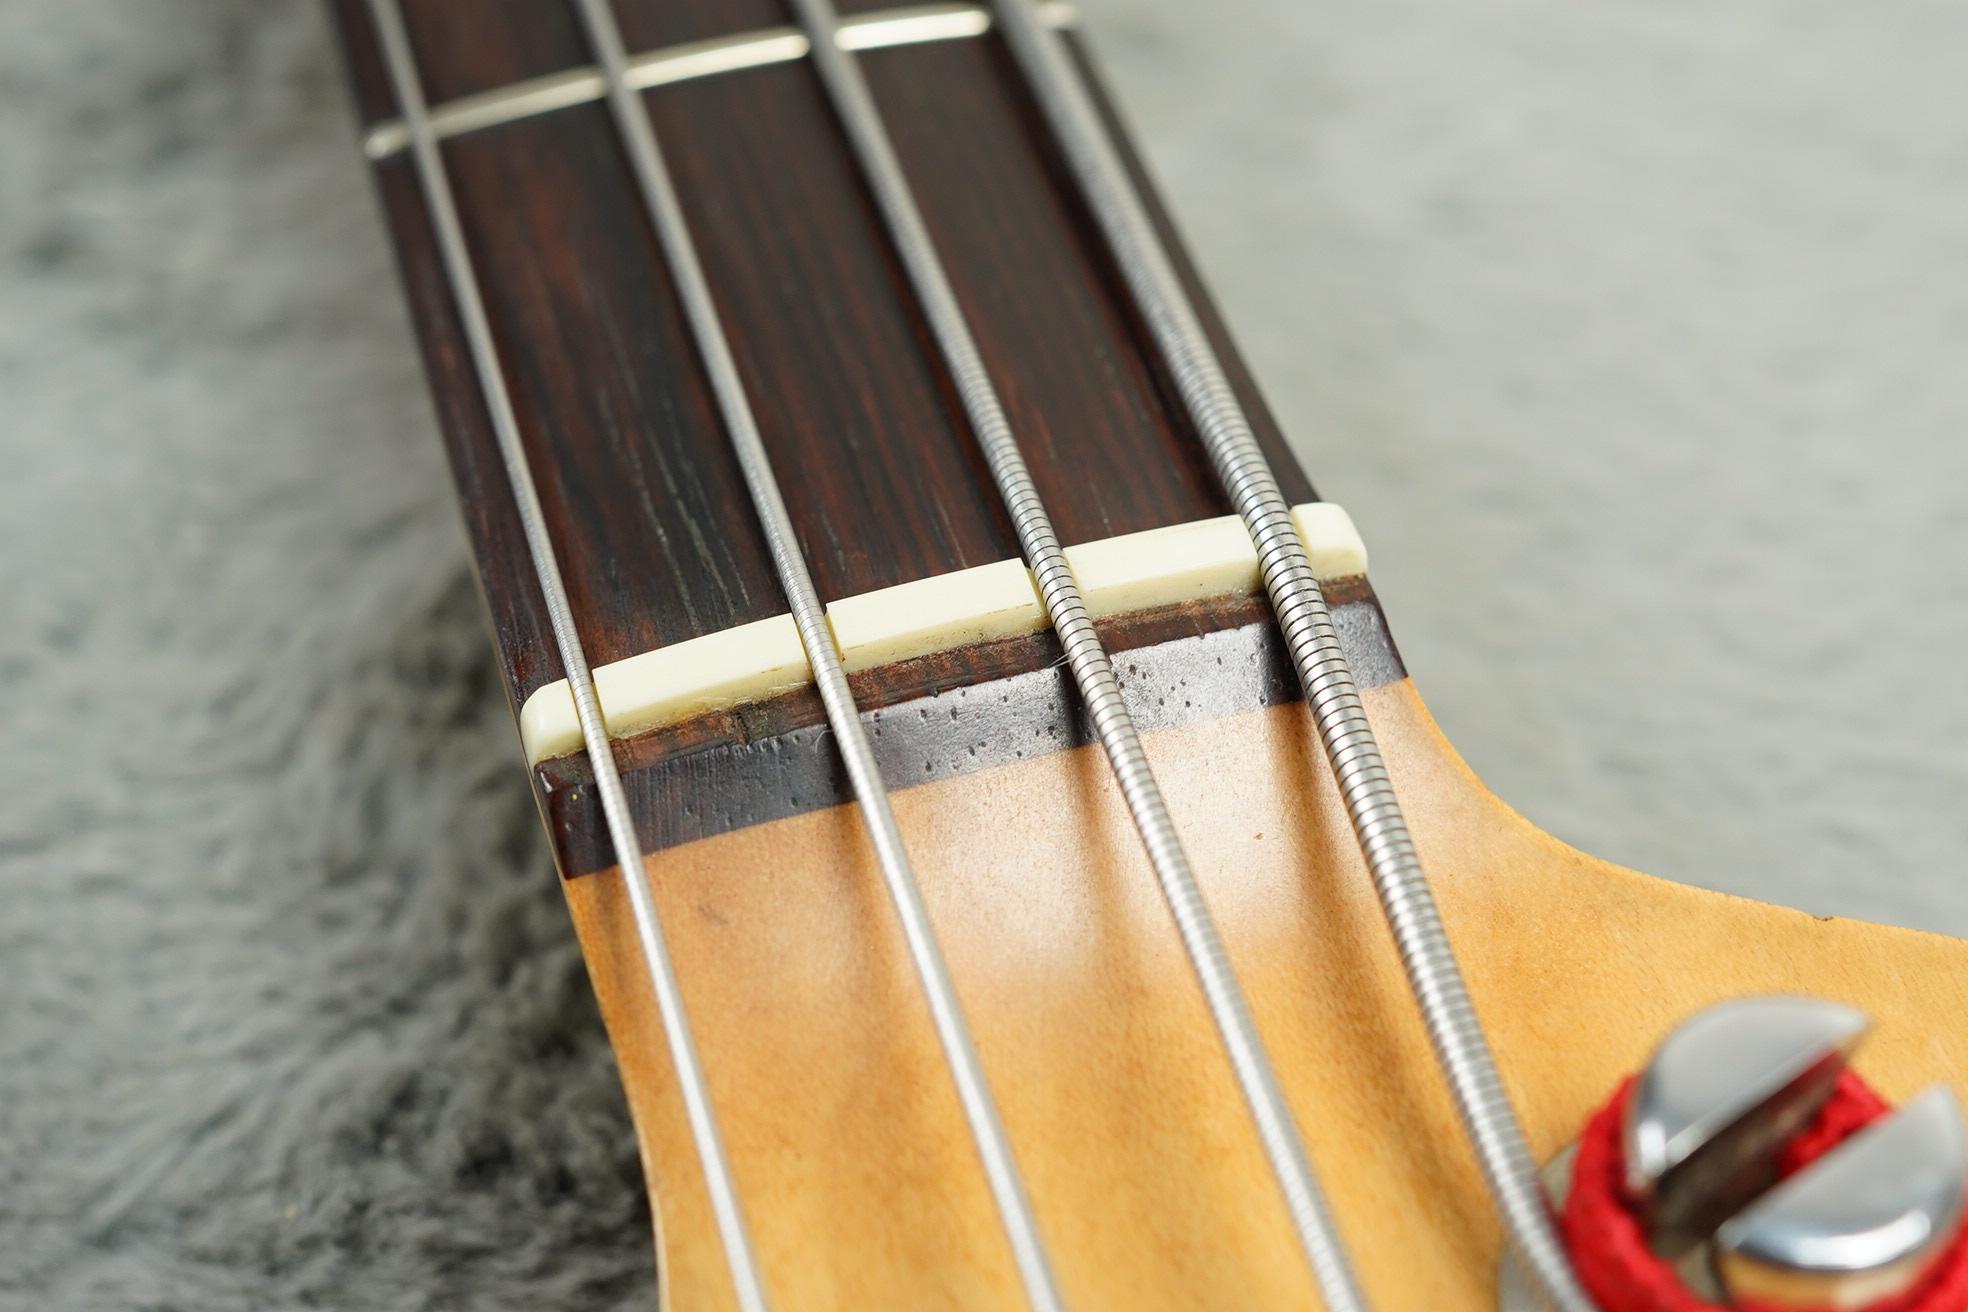 early 1964 Fender Precision Bass Blonde